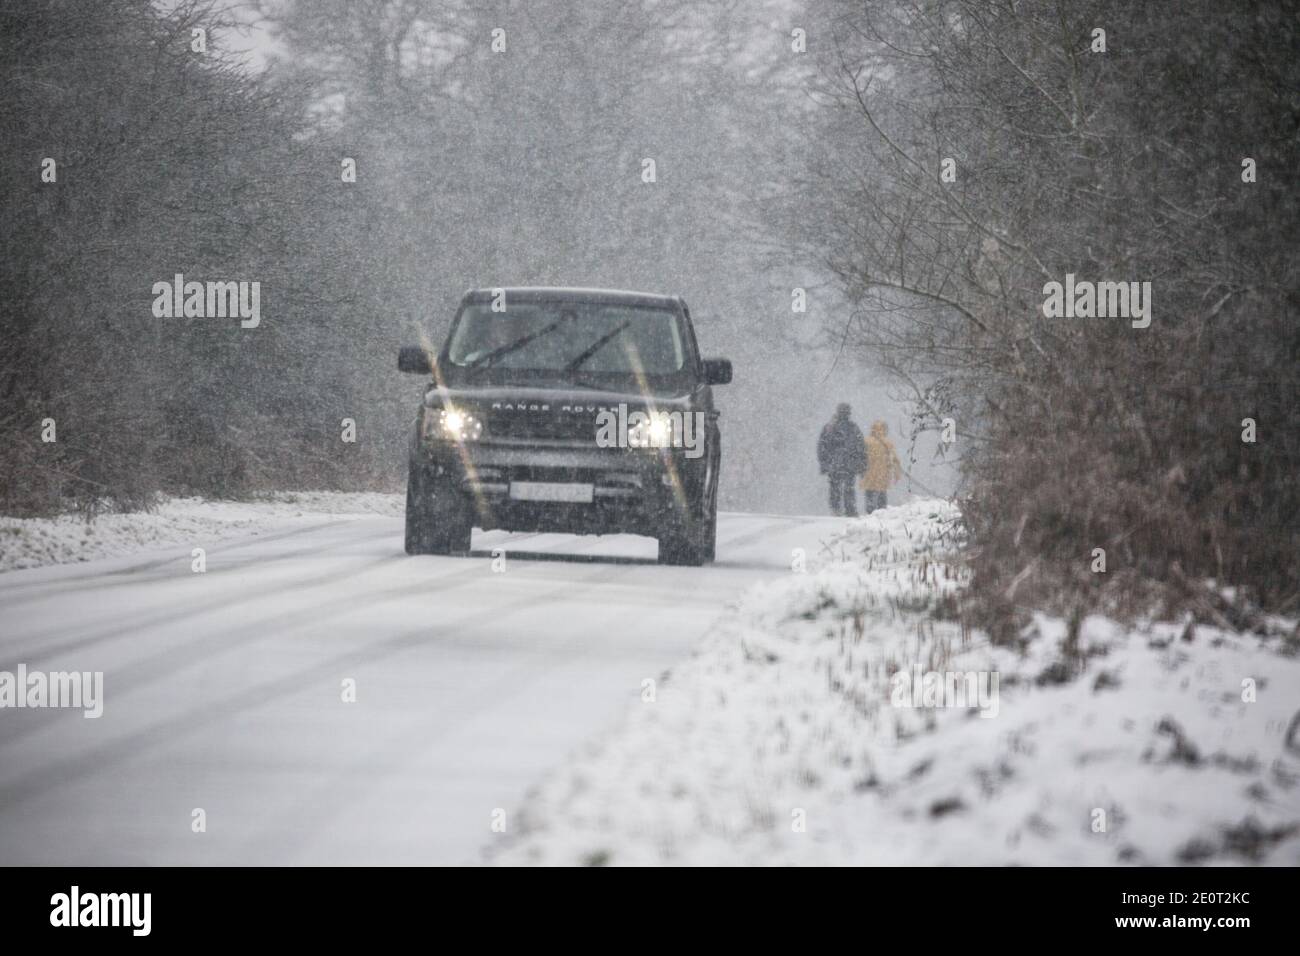 Kidderminster, UK. 2nd January, 2021. UK weather: with daytime temperatures failing to rise much above freezing across Worcestshire and roads already icy, Kidderminster is hit with heavy morning snow showers making driving conditions hazardous for all motorists. Credit: Lee Hudson/Alamy Live News Stock Photo